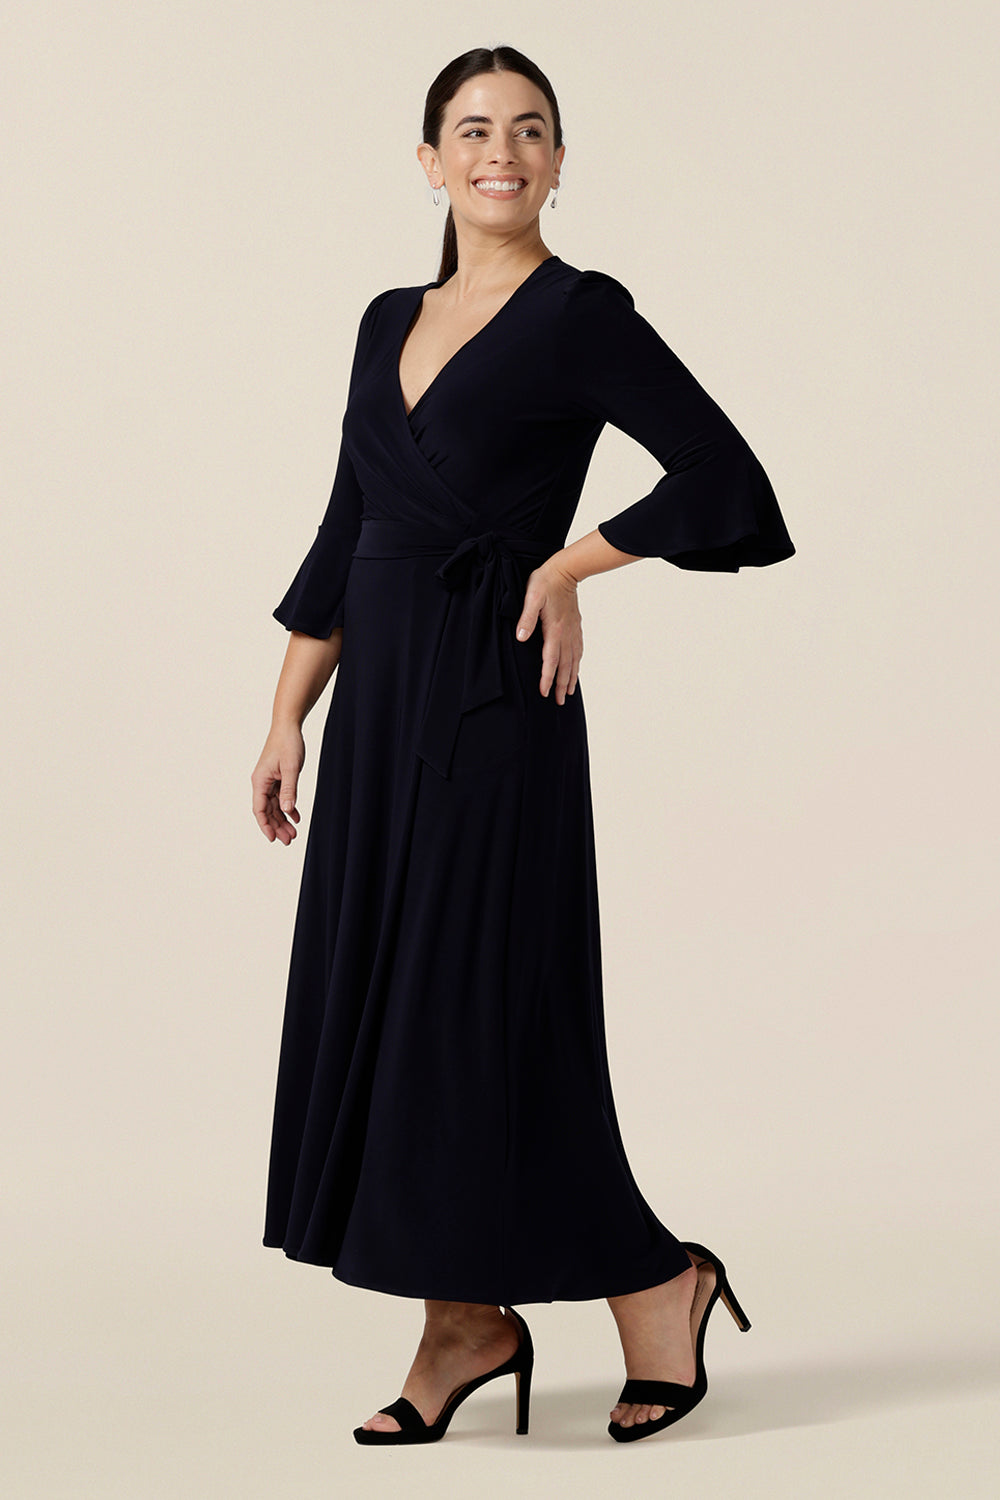 Shown for petite height women, this navy blue wrap dress is perfect for elegant evening and occasion wear. This is a cocktail dress with 3/4 sleeves and a full midi-length skirt. Made in Australia, shop wrap dresses in sizes 8 to 24 at Leina & Fleur.